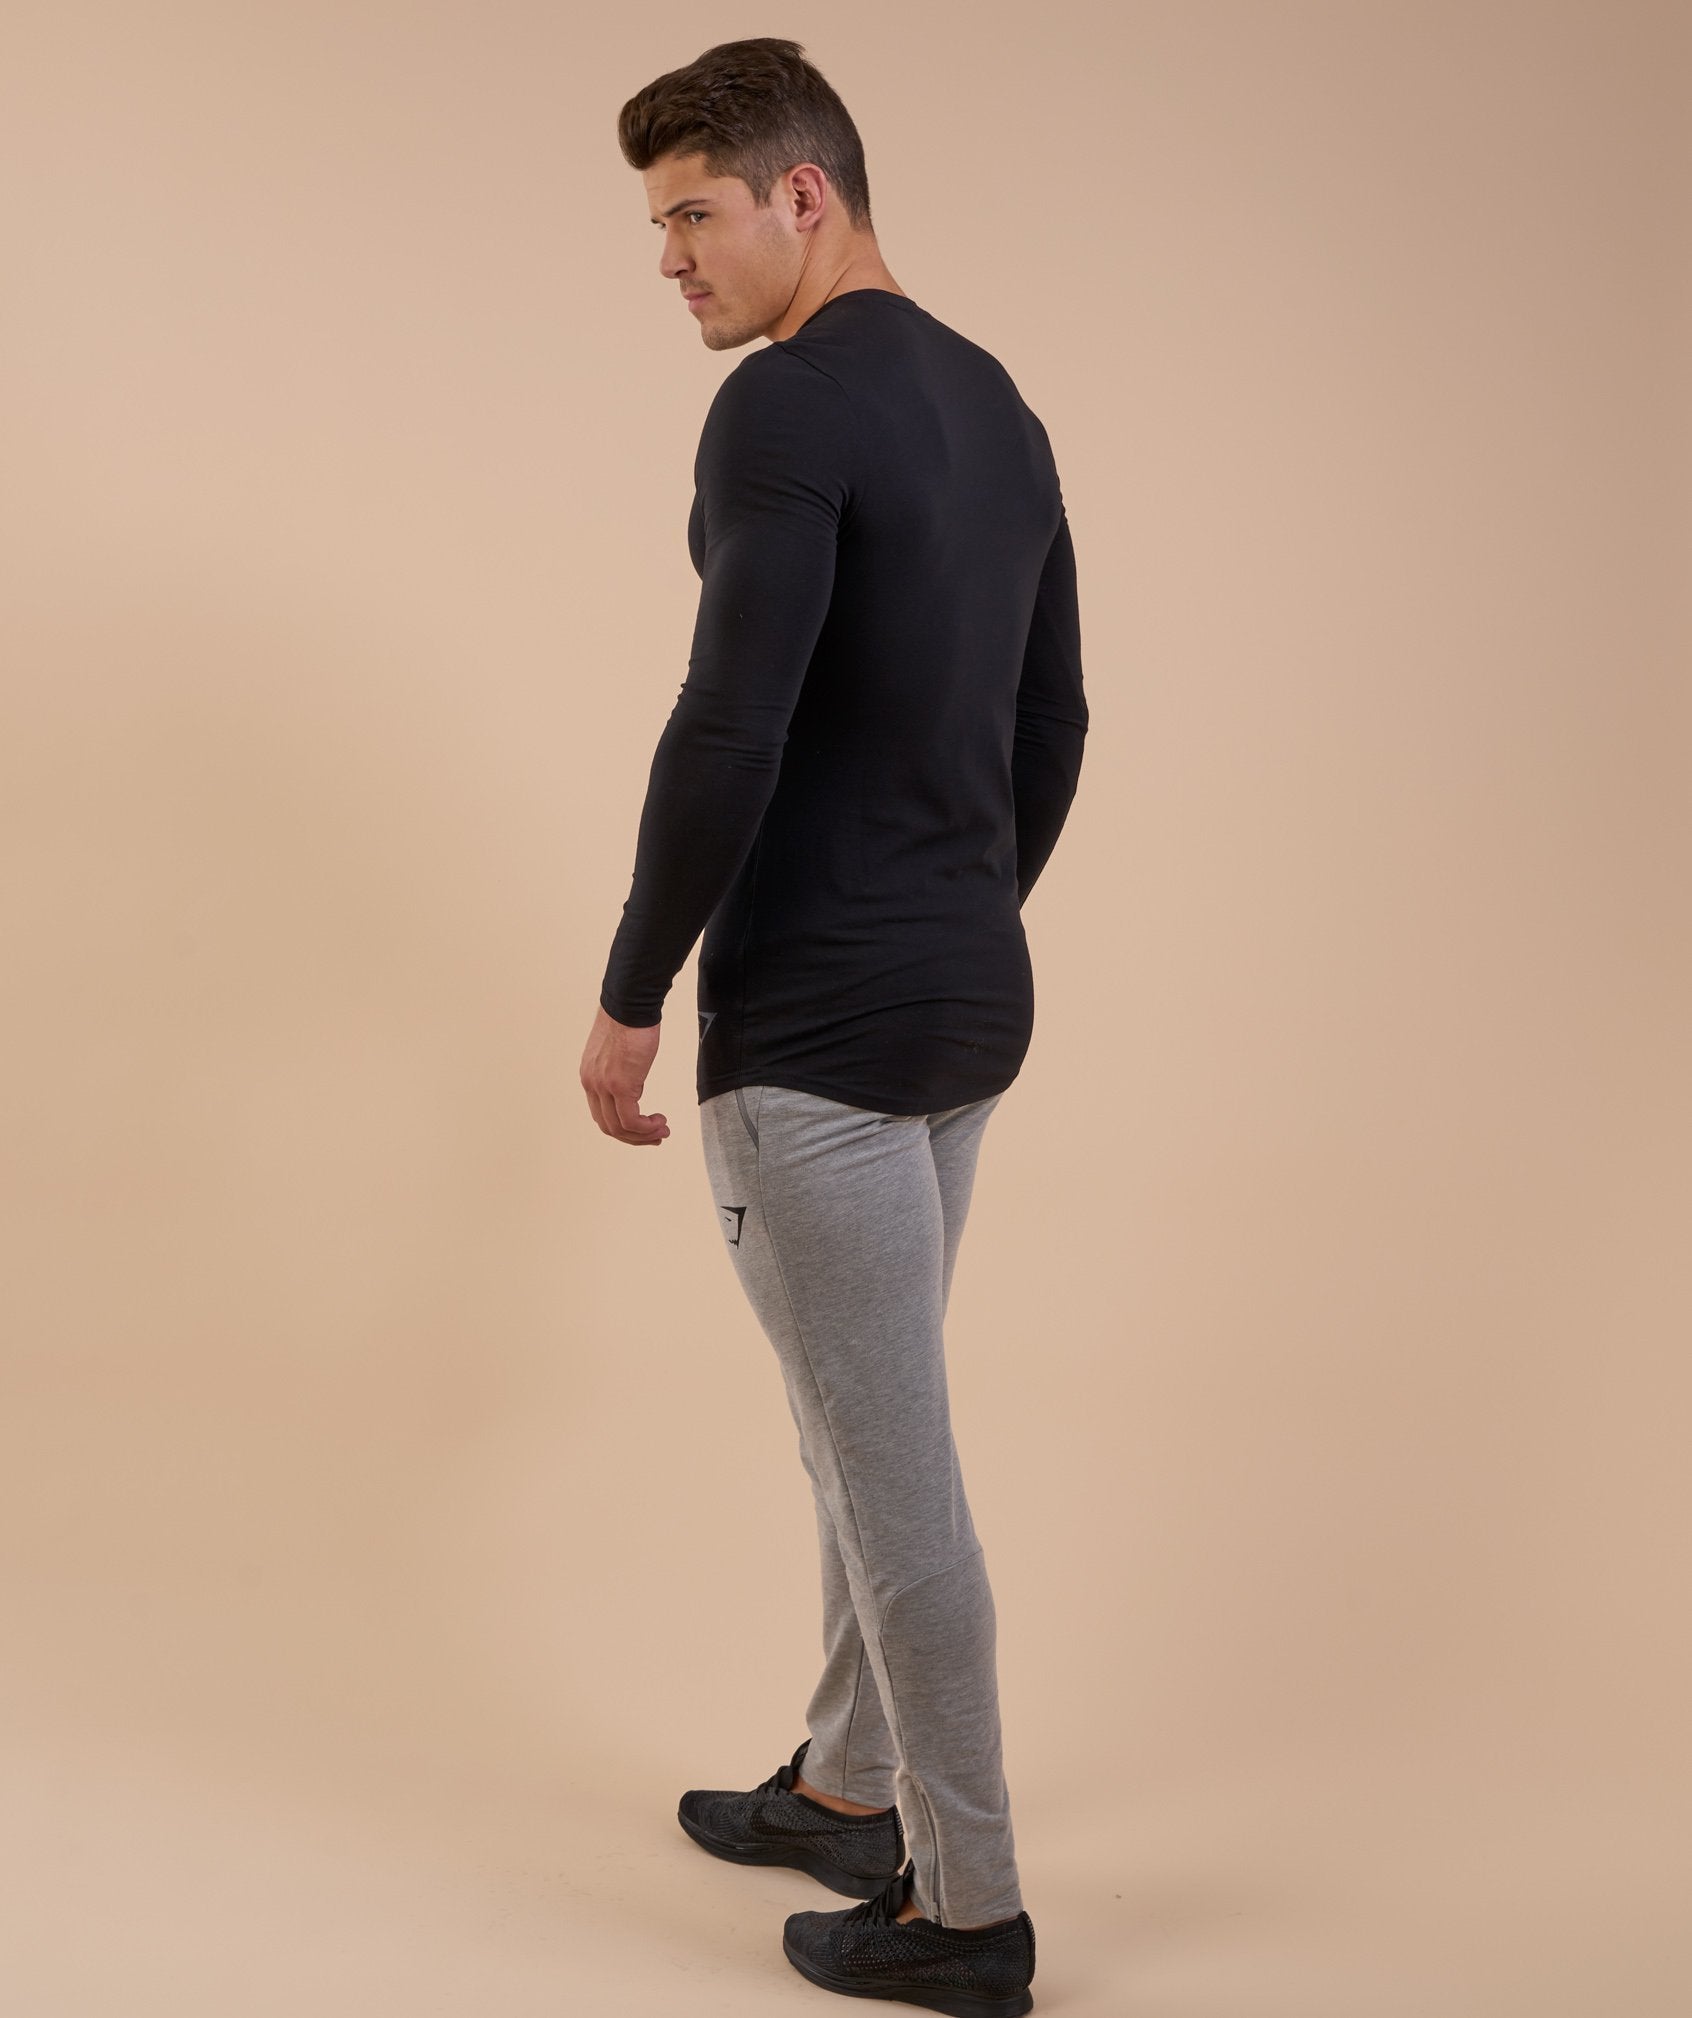 Solace Longline Long Sleeve T-shirt in Black - view 3